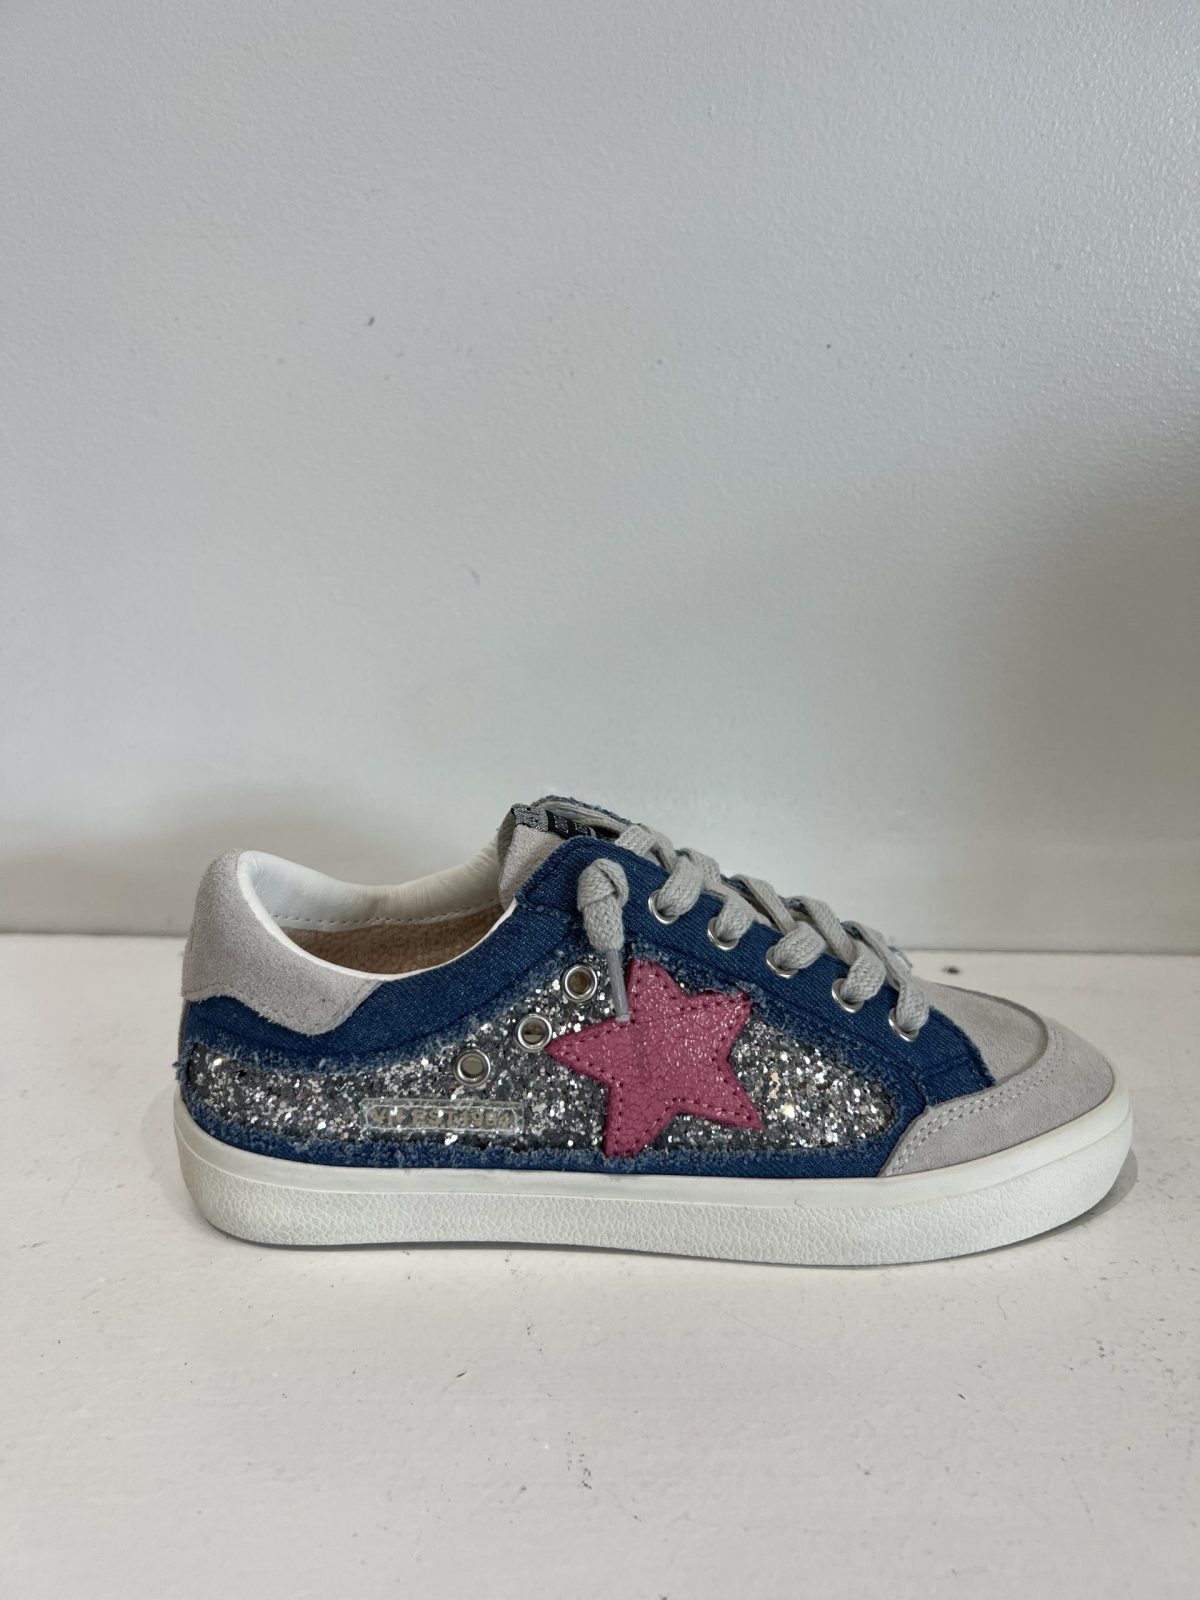 Vintage Havana Selene Denim Sparkle Star Detail Leather Sneaker | Ooh Ooh Shoes women's clothing and shoe boutique located in Naples and Mashpee